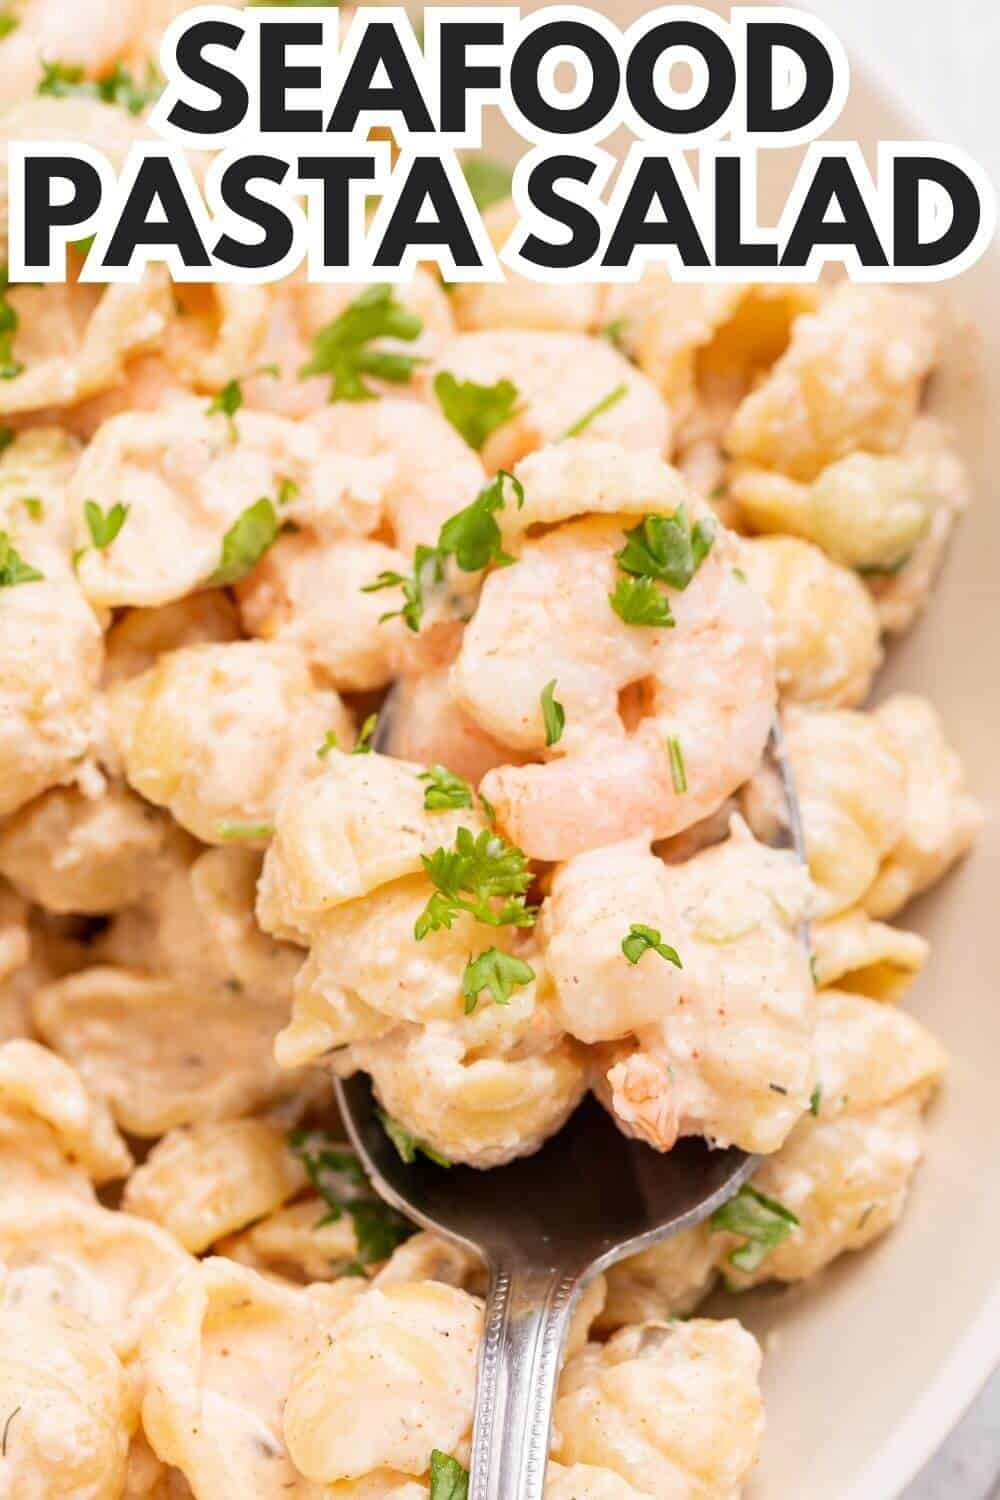 Seafood pasta salad with recipe title text overlay.